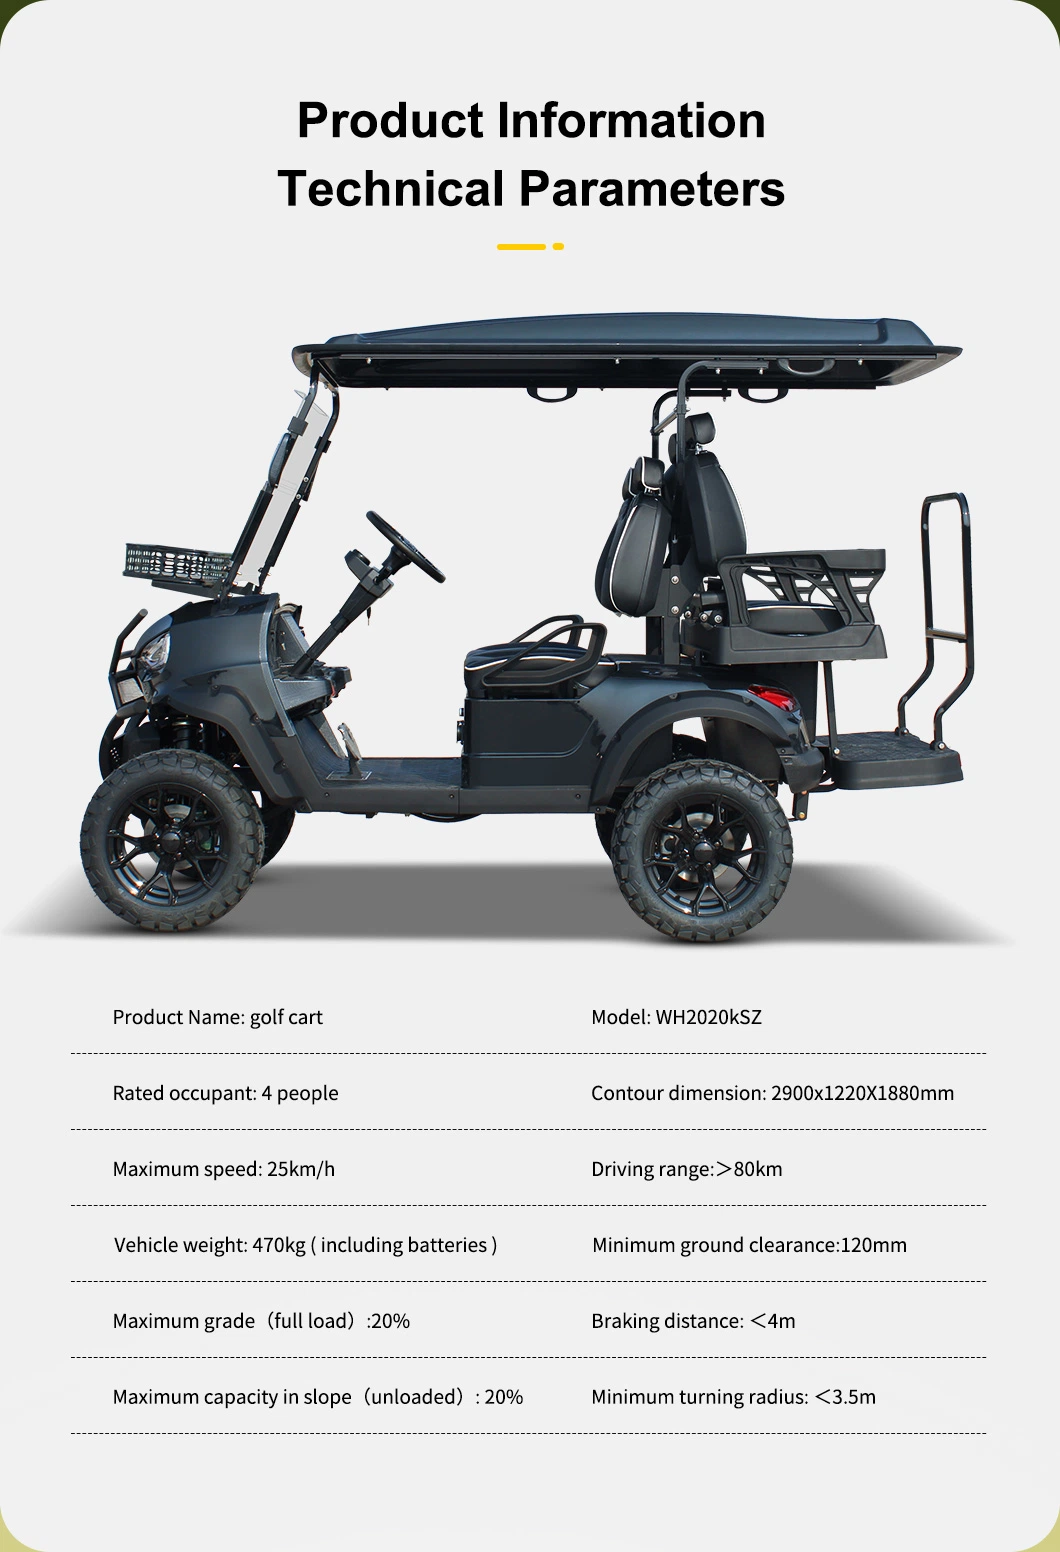 New Arrival Style B3.0 Luxury Seat Club Cart Electric Golf Buggy Hunting Car with CE DOT